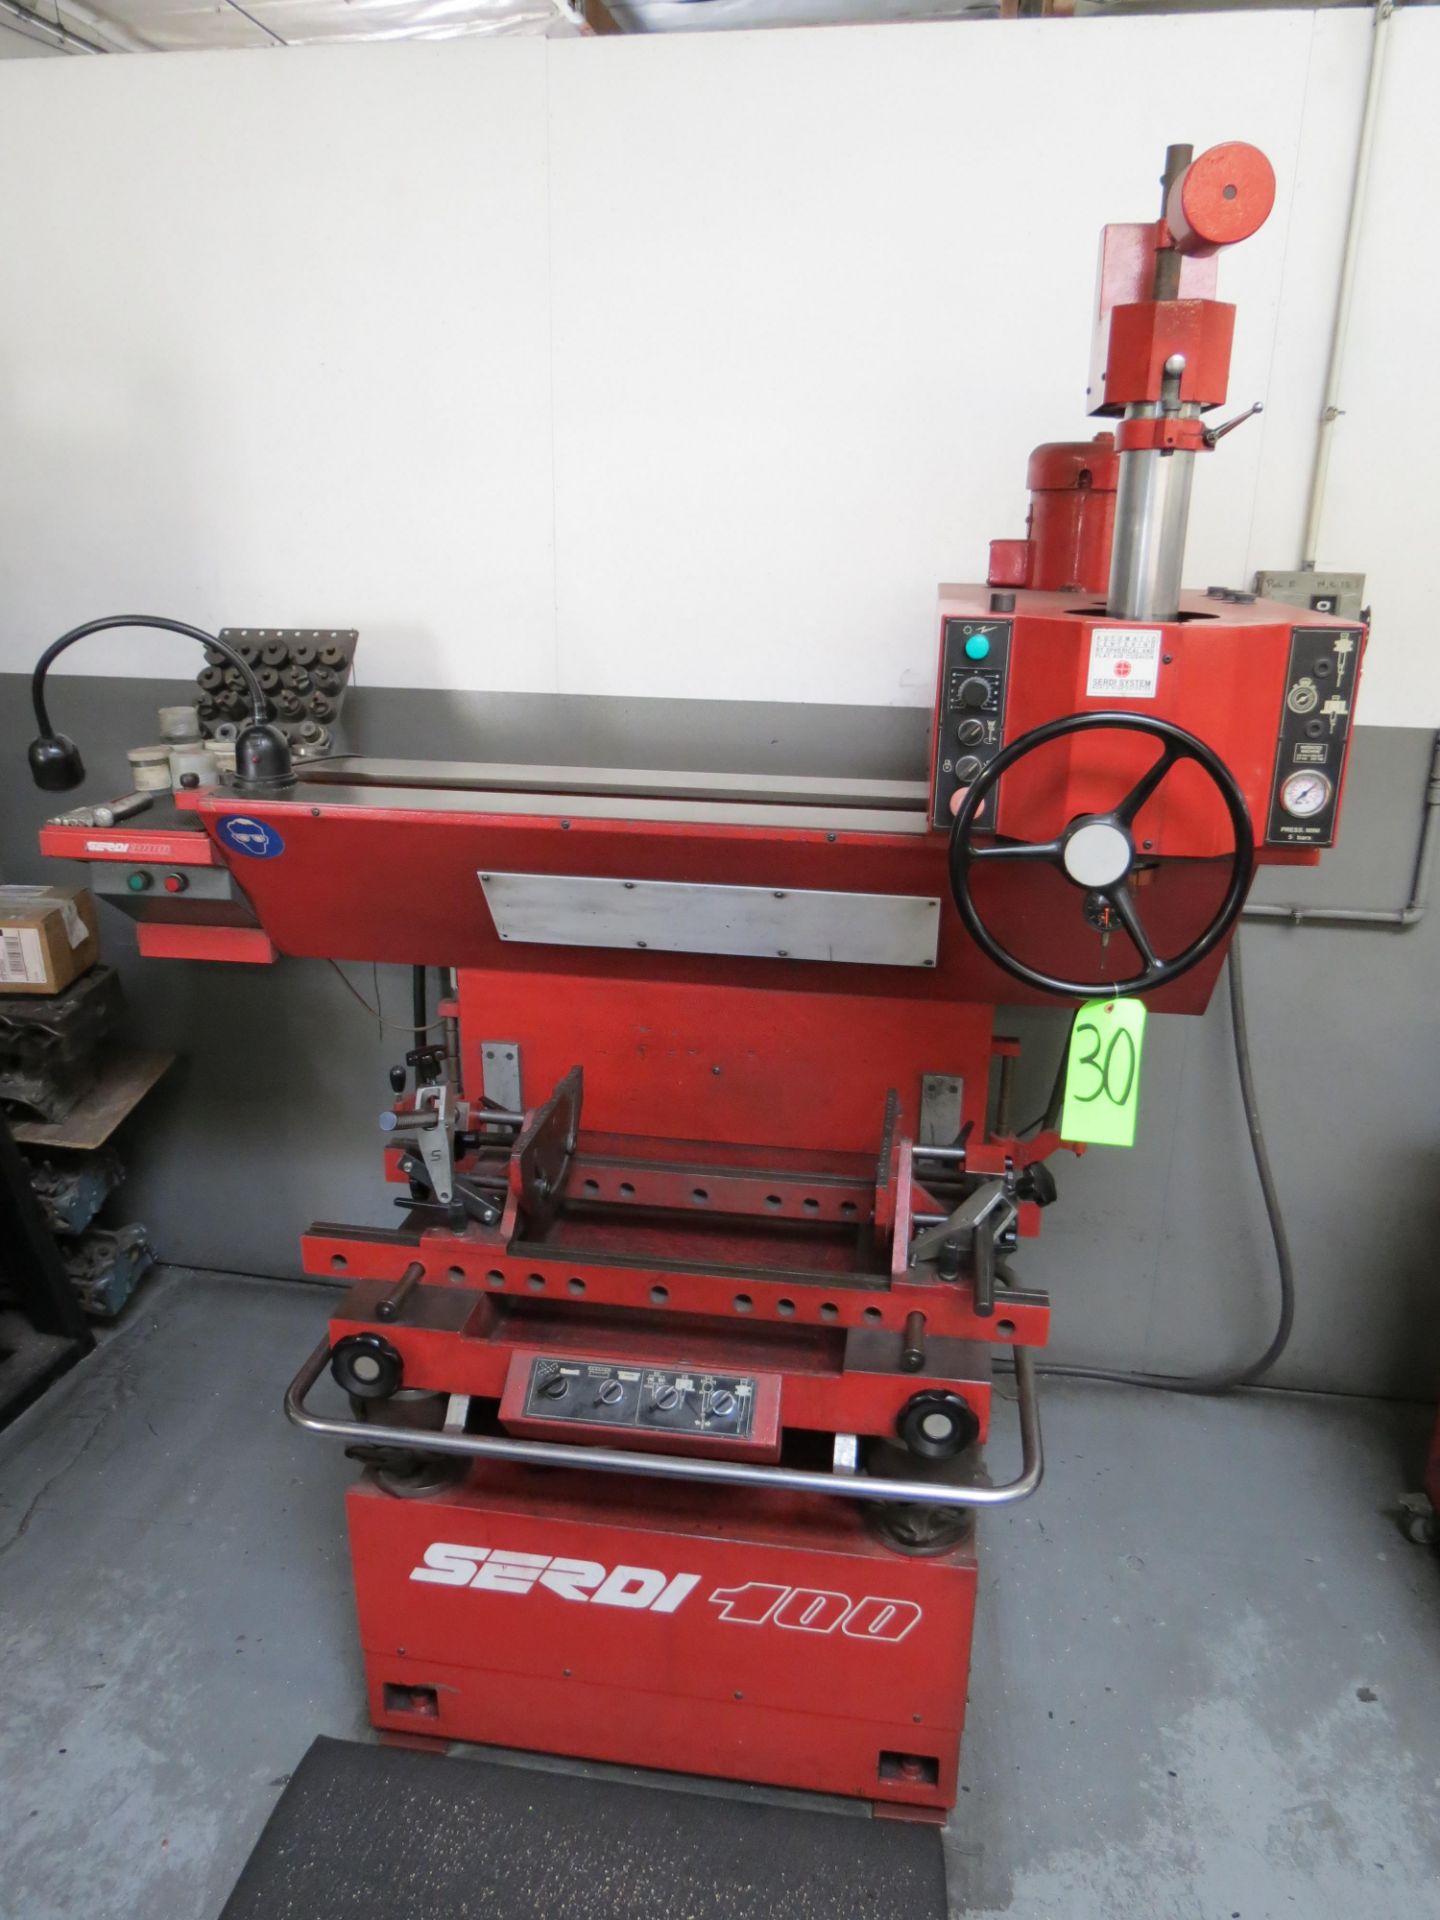 SERDI 100 VALVE SEAT CUTTING MACHINE WITH AND GUIDE AND SEAT TOOLING 1" TO 2 1/2" - Image 2 of 4